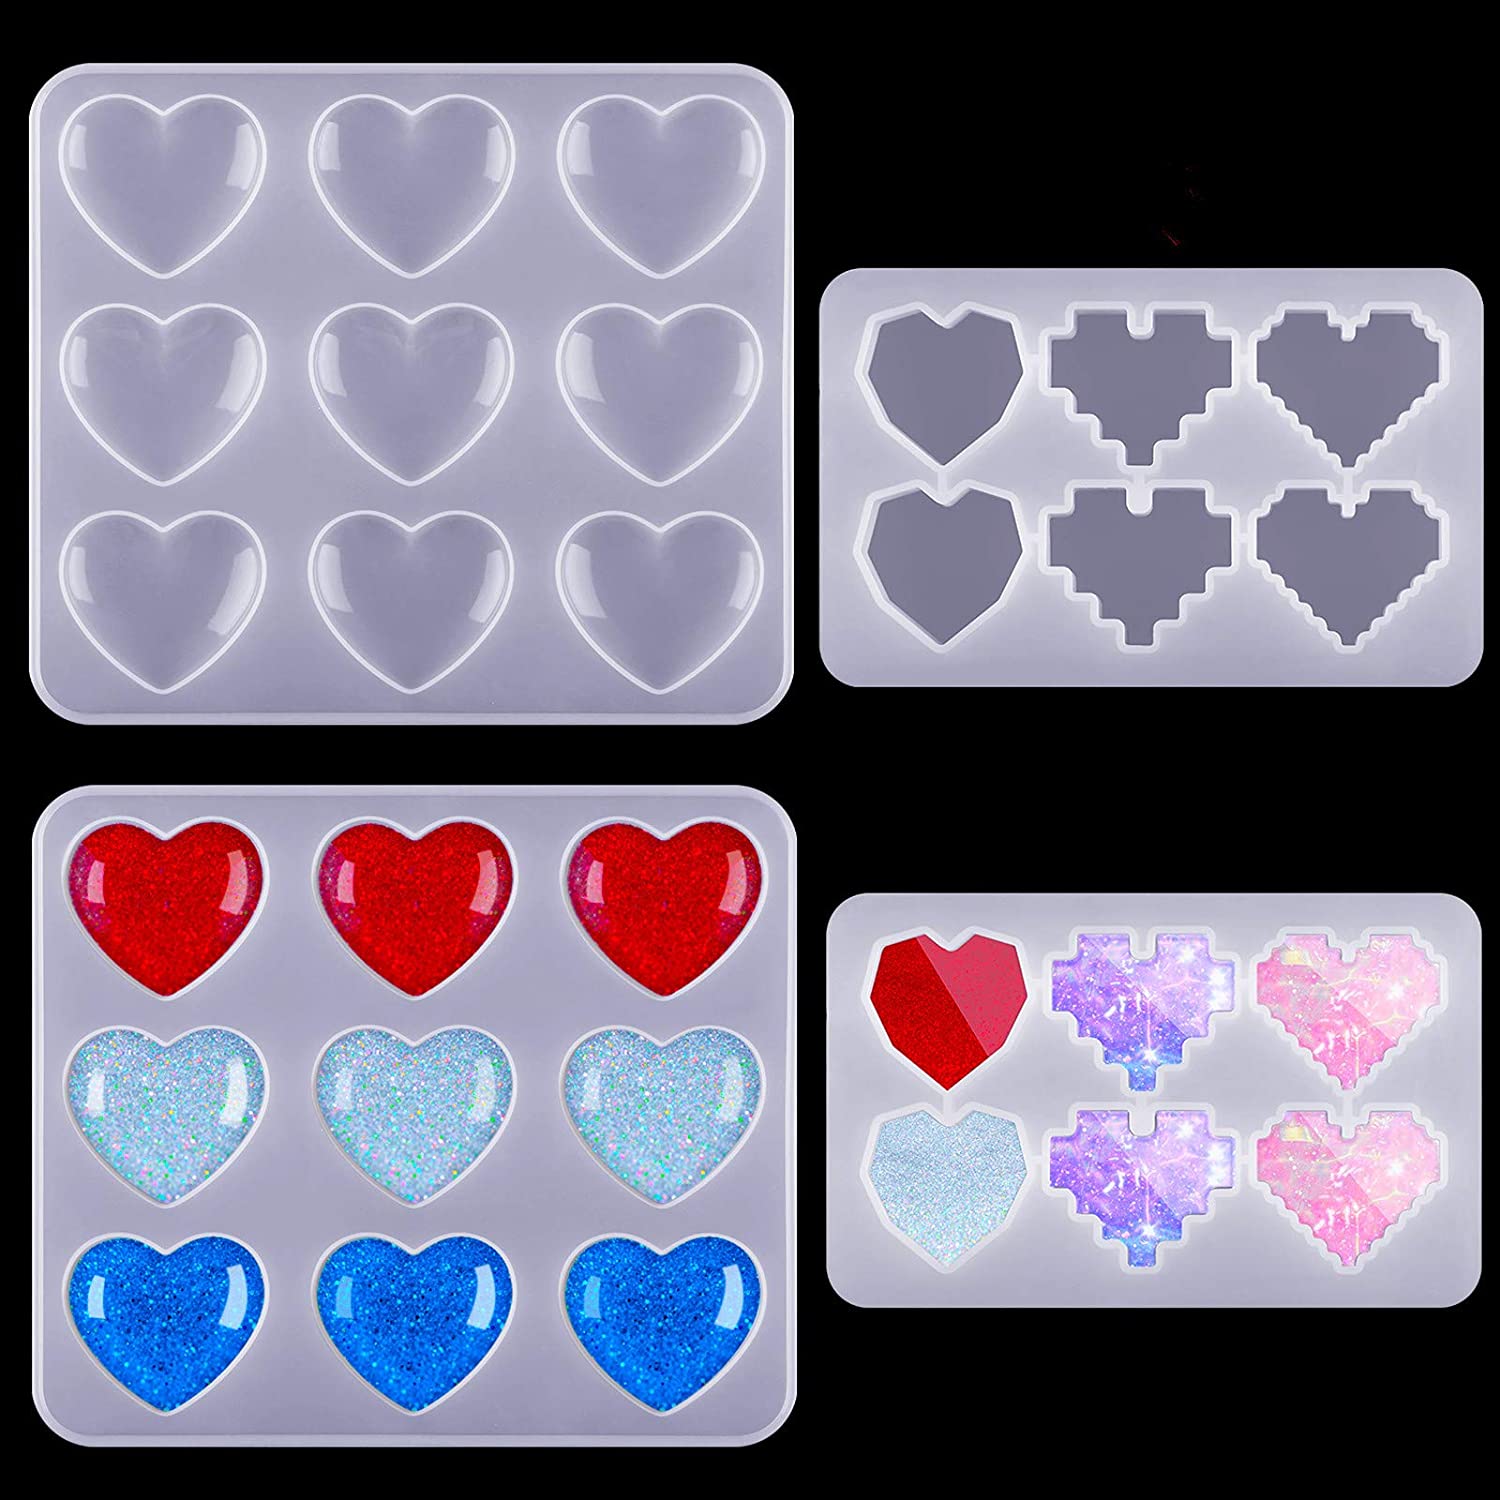 Heart Shape Resin Mold Keychain Charms Mold 9-Cavity Silicone Heart Mold Heart-Shaped Casting Jewelry Mold for Epoxy Resin DIY Mold Keychain Jewelry Pendant Craft Making